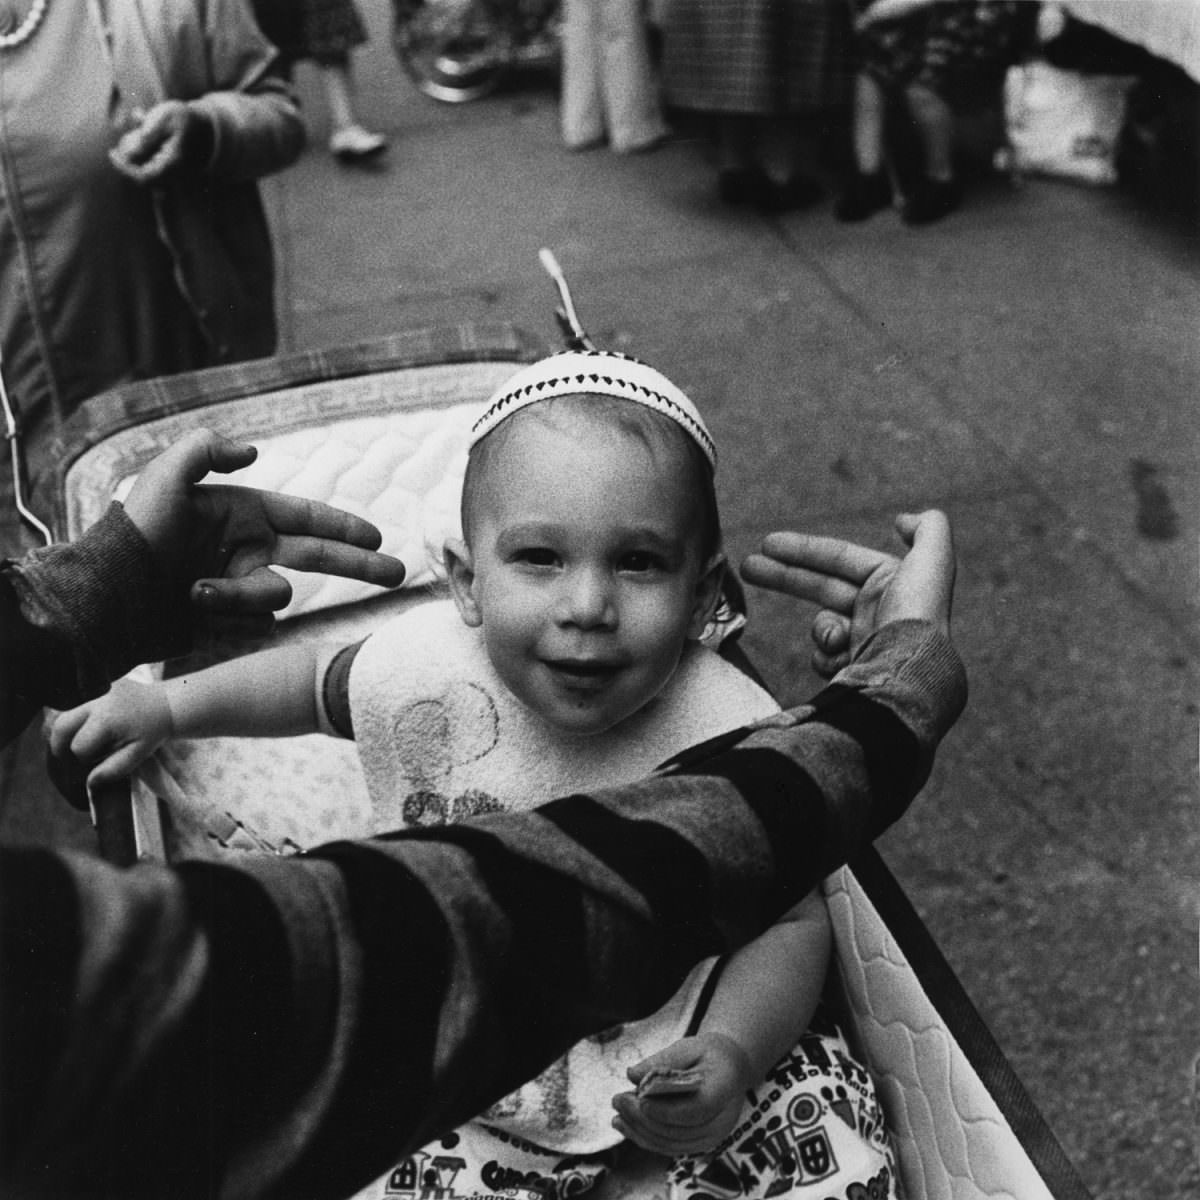 A Future Talmudic Student Being Pointed Out By My Photography Student Michael Marsh At The Lower East Side Street Festival, 1978